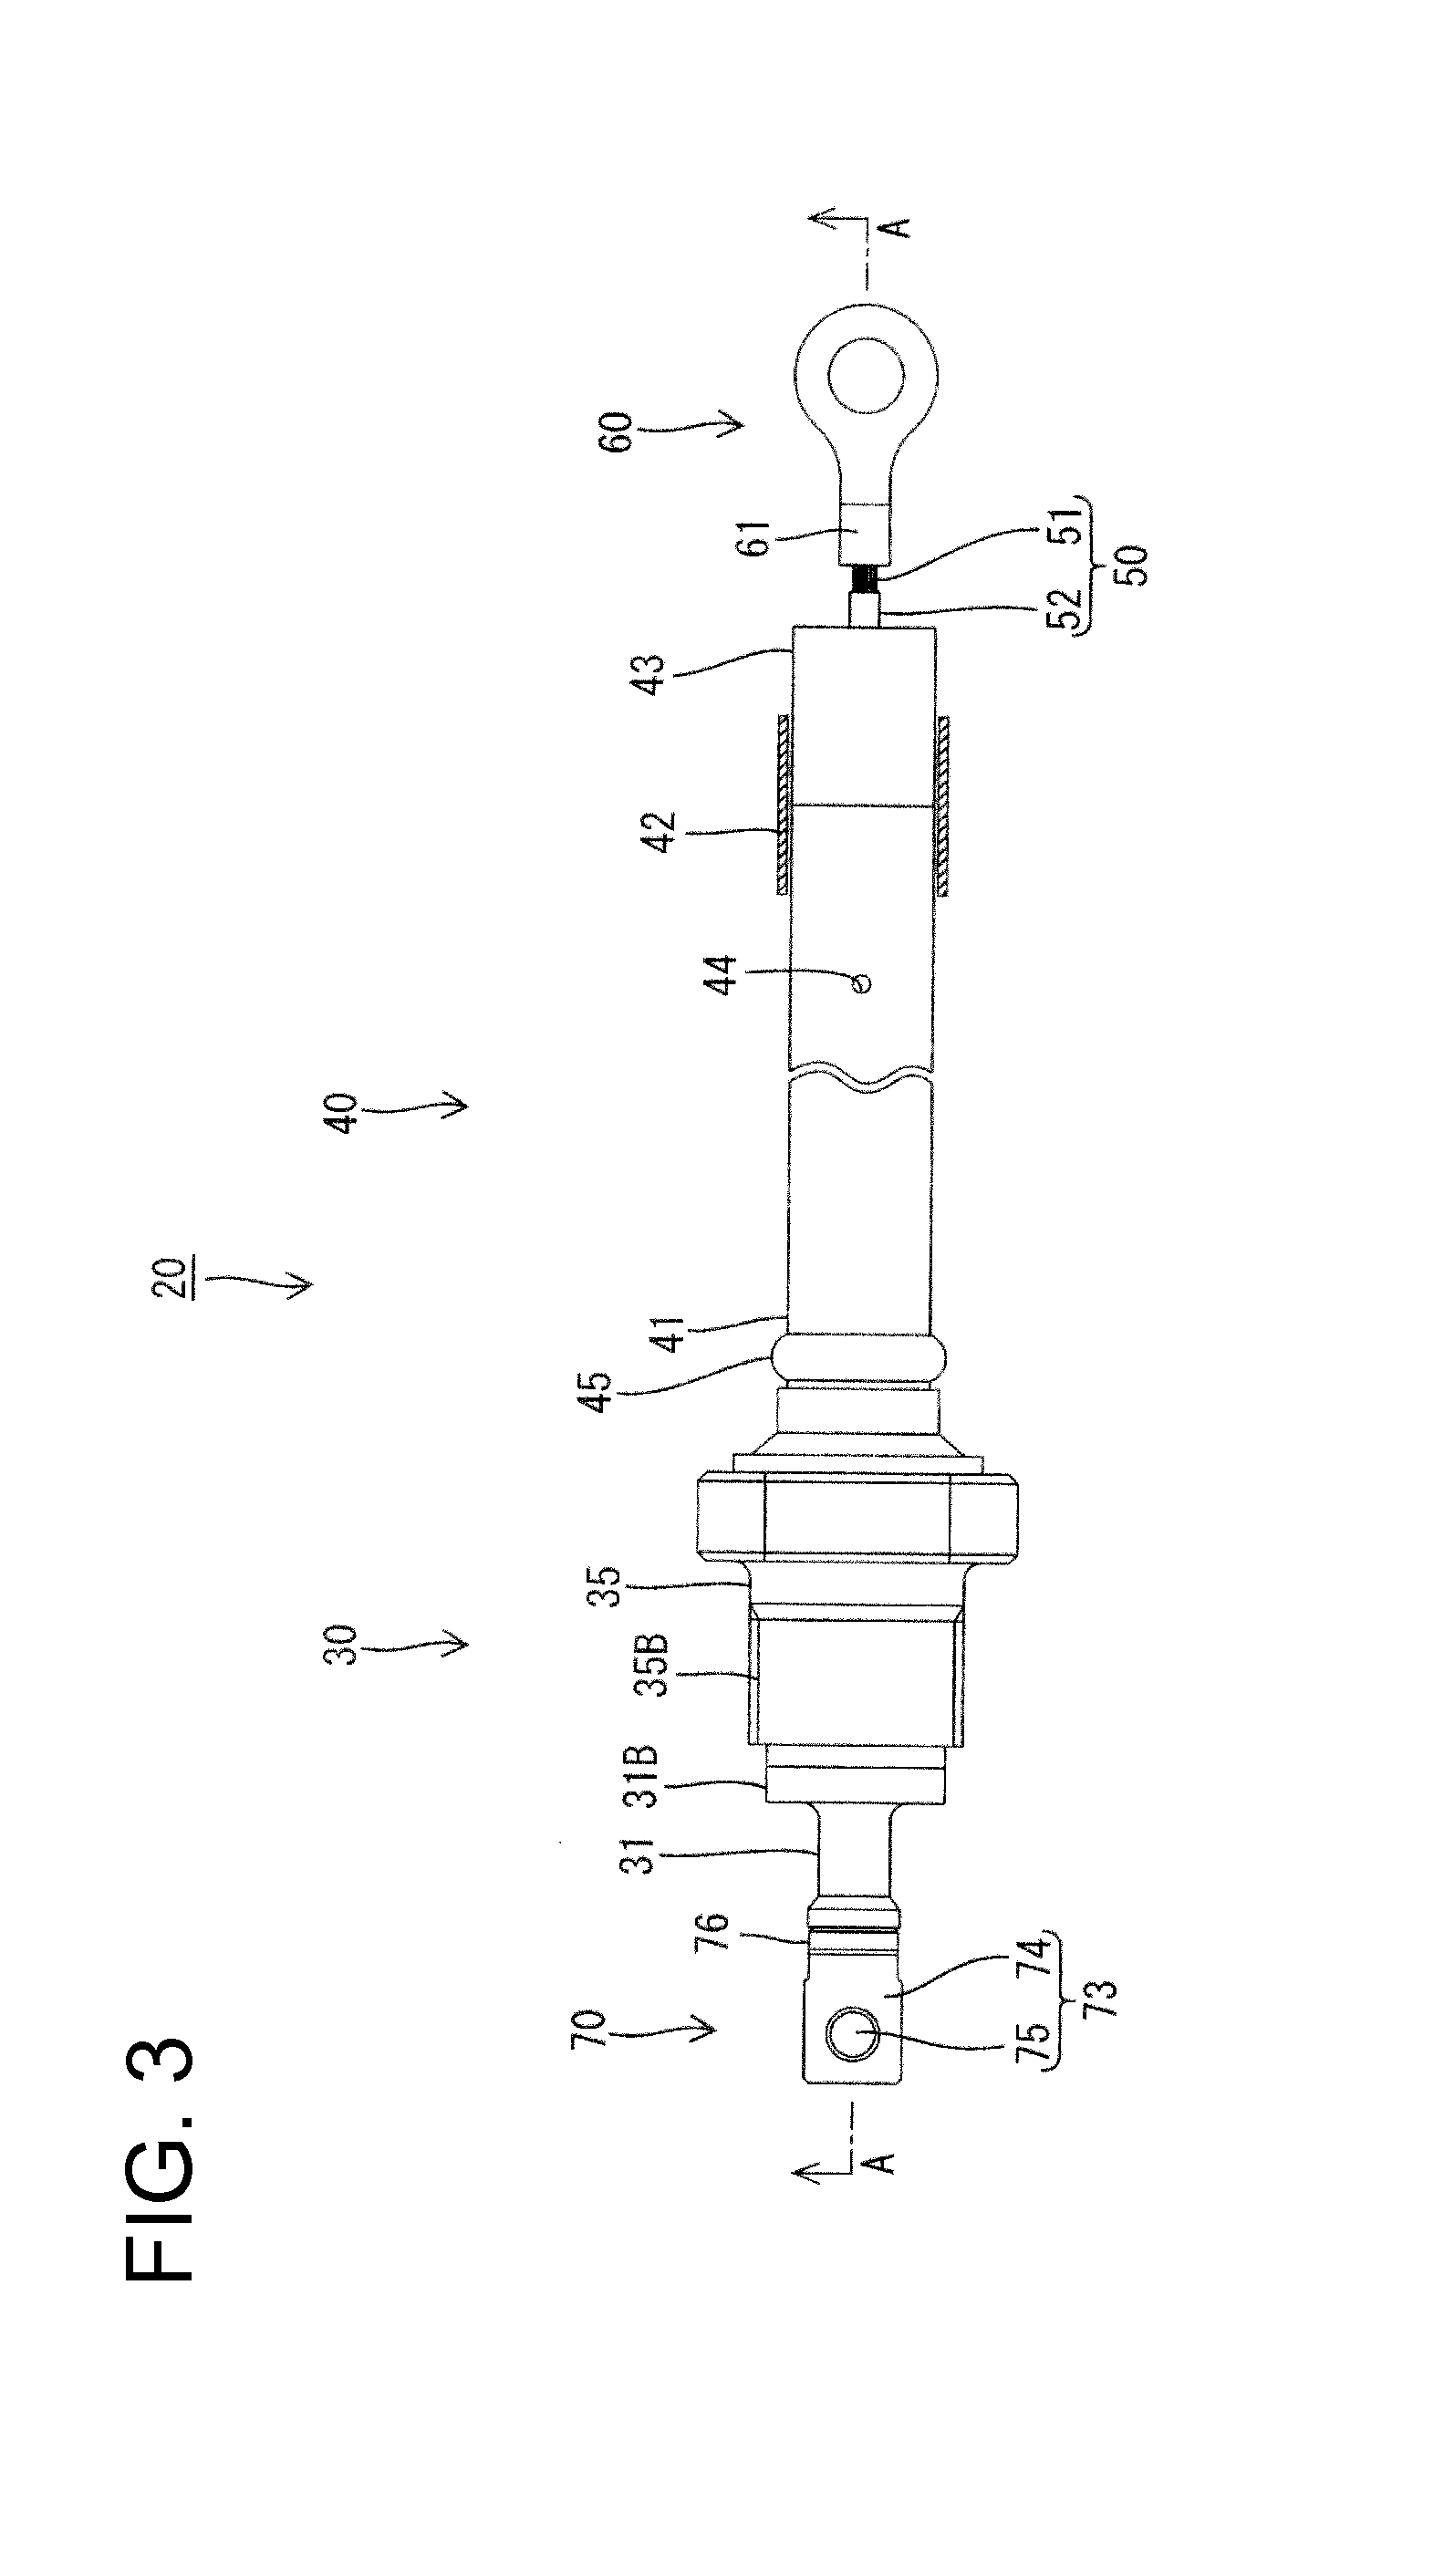 Harness for electric heating catalyst